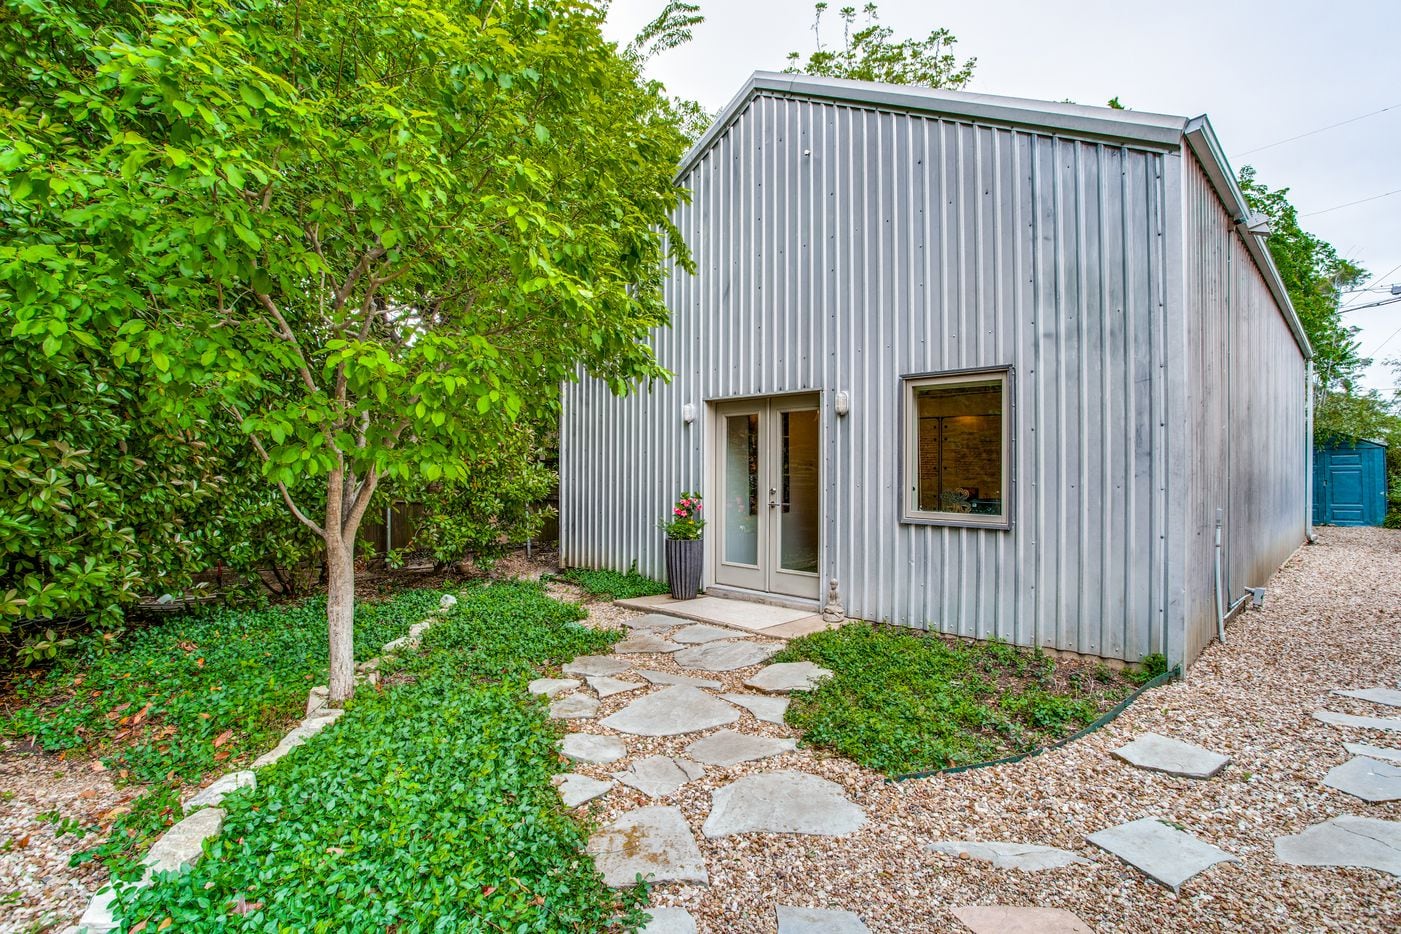 Take a look at the home at 4303 Middleton Road in Dallas.